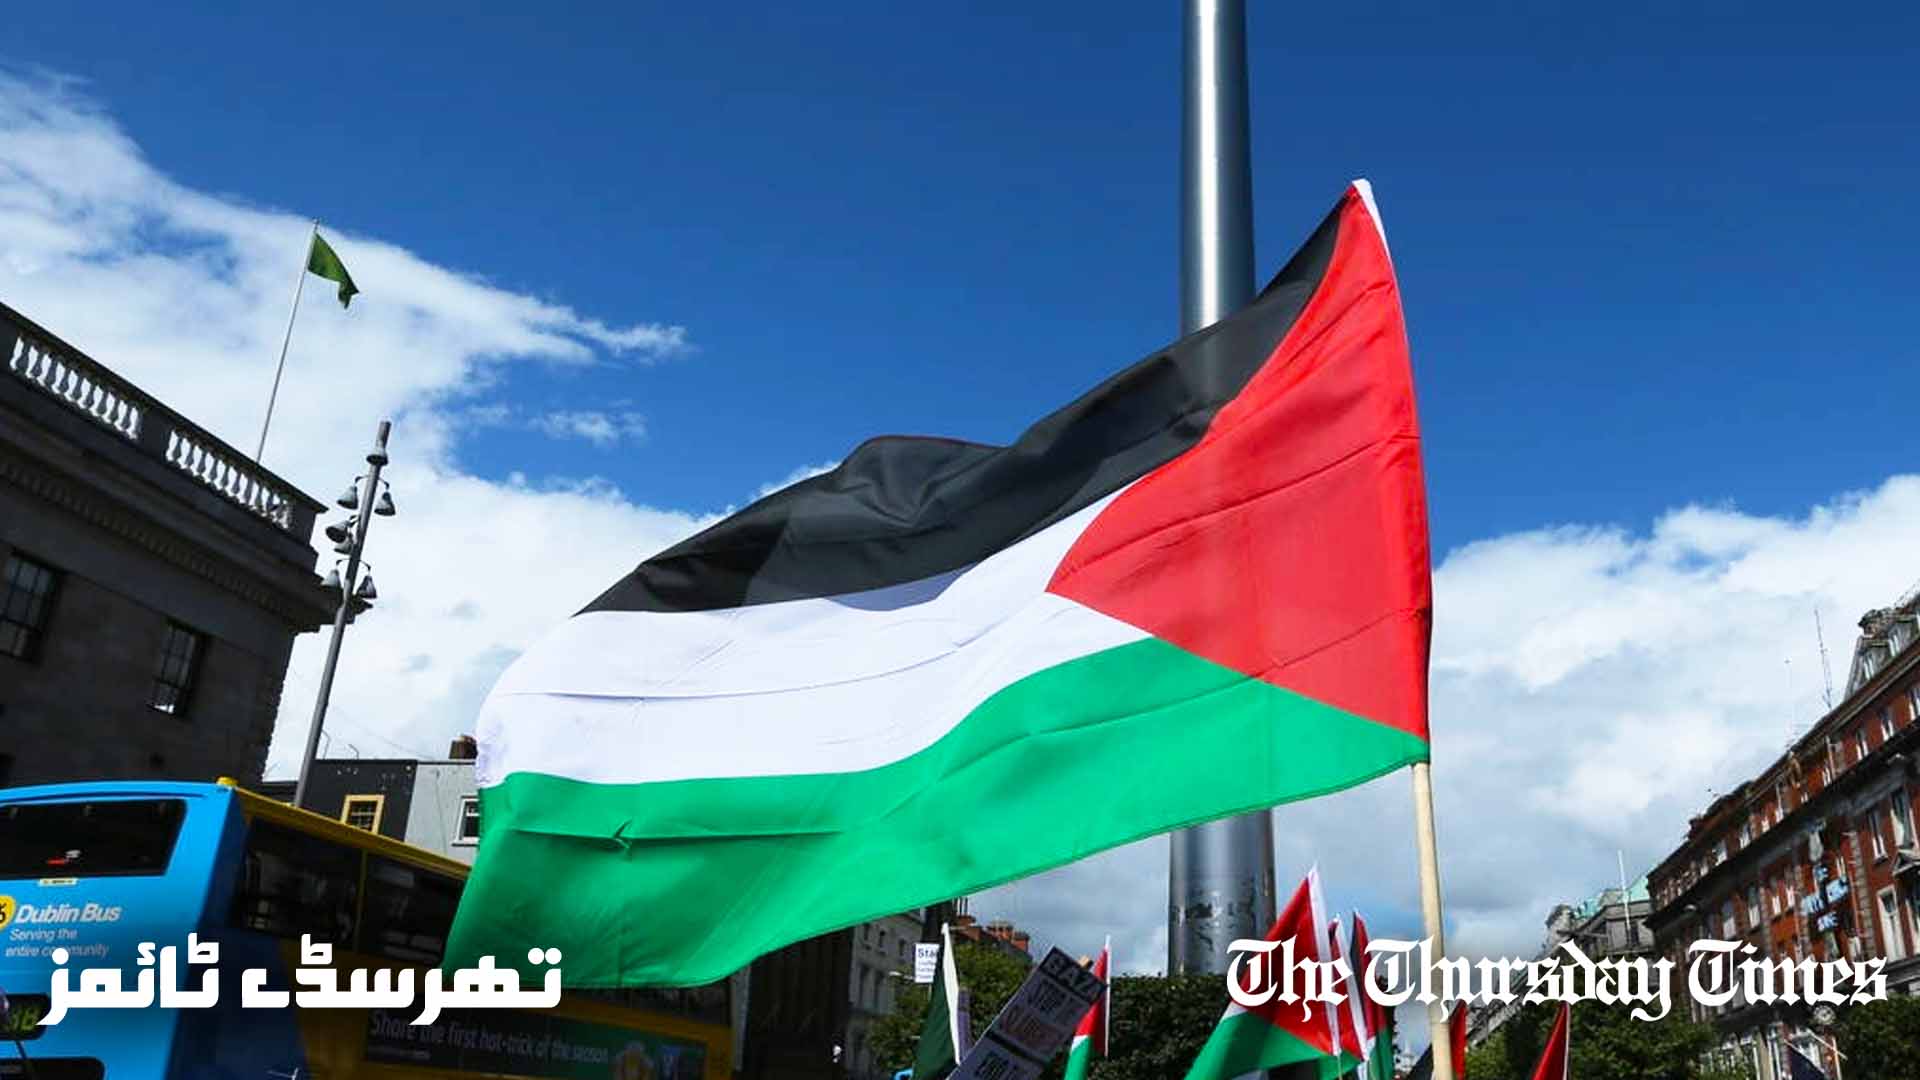 A file photo is shown of the Palestinian flag being waved by supporters on Dublin’s O’Connell Street. — FILE/THE THURSDAY TIMES